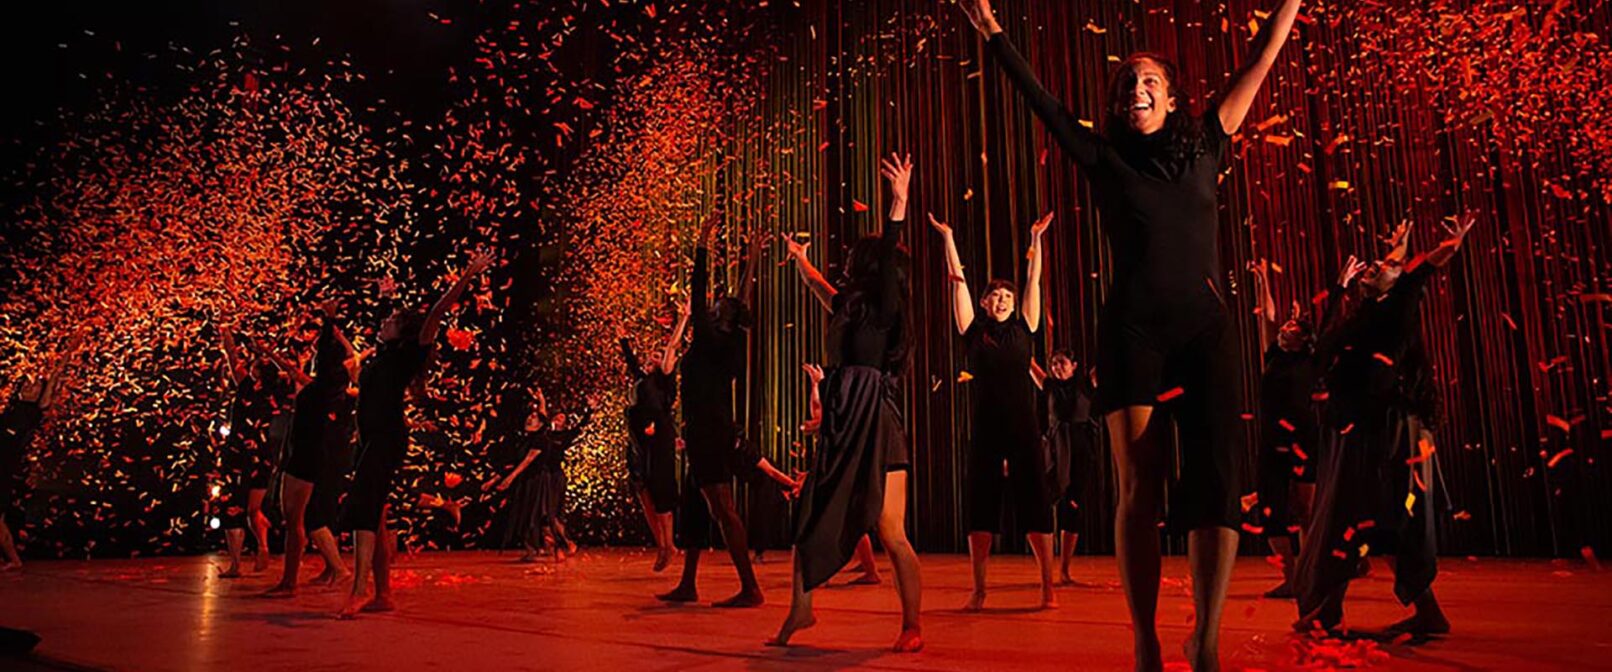 Nova Dance. A scene with a sense of joy that shows a group of dancers spread across a stage all wearing black. Some have their arms raised. The stage is lit red and the backdrop has splashes of red light against black.